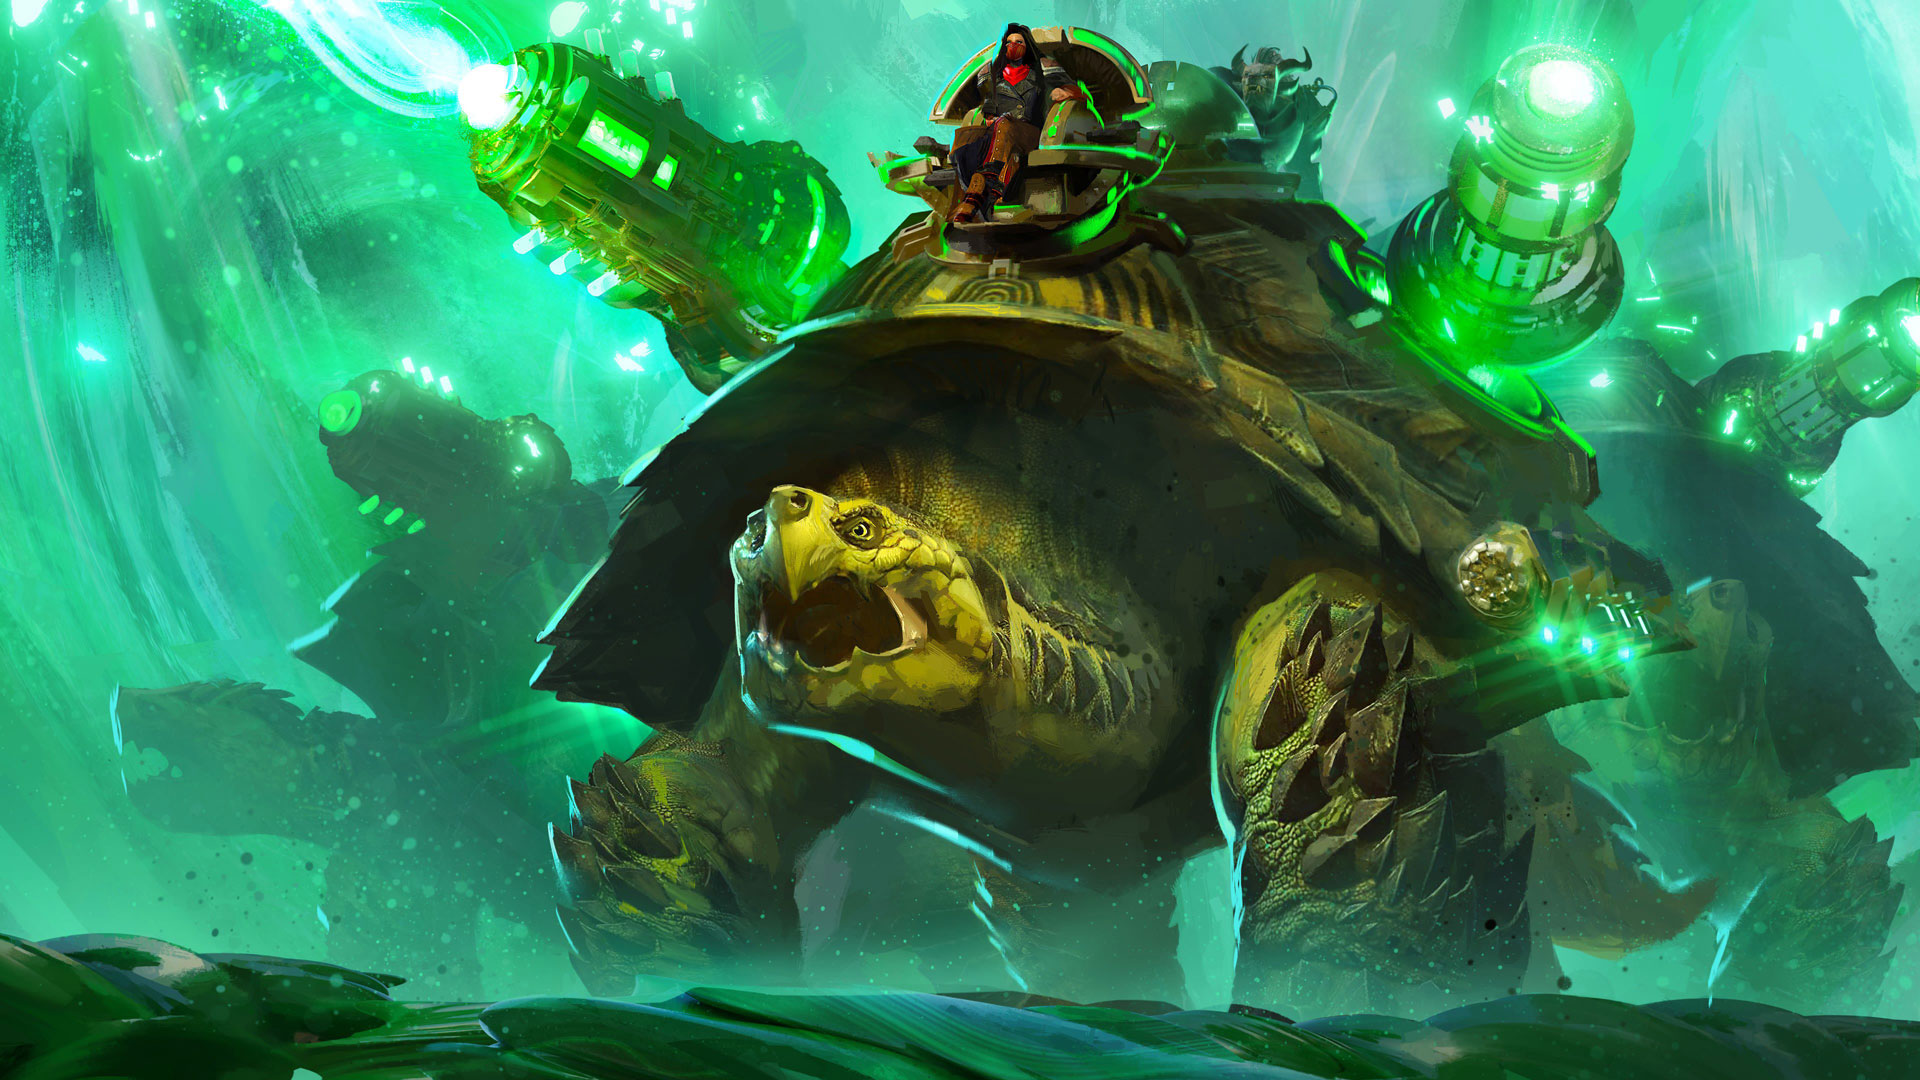 You can now test the Siege Turtle in Guild Wars 2